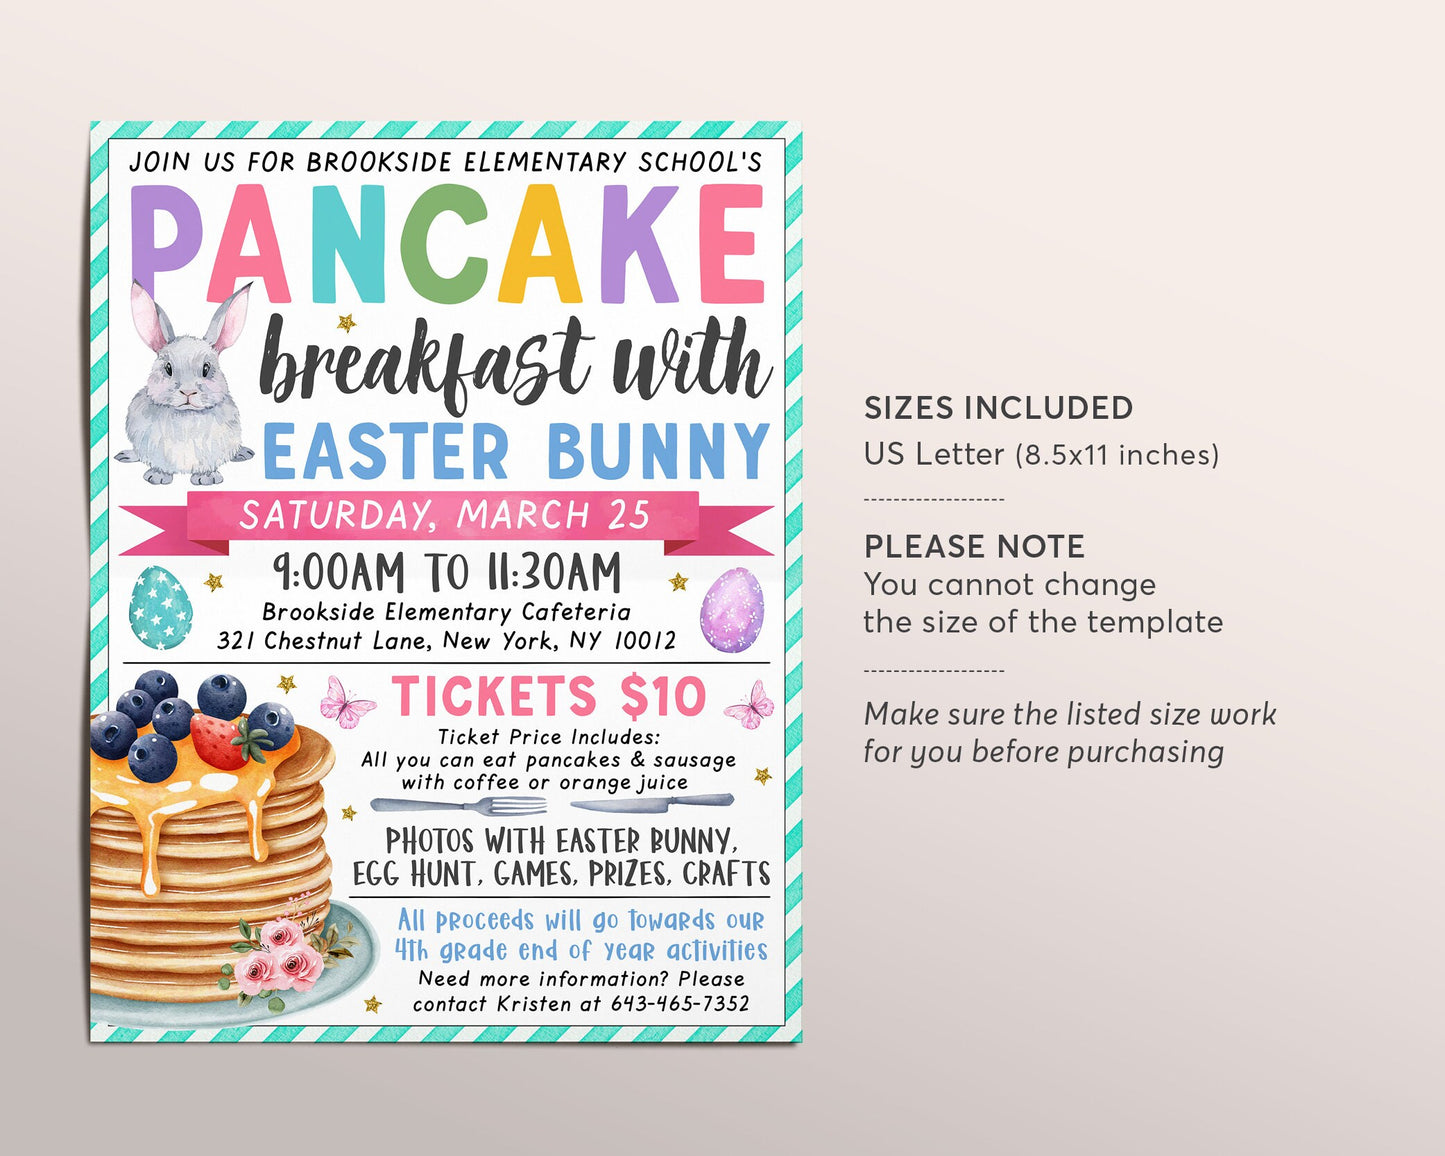 Breakfast with Easter Bunny Flyer Editable Template, Spring Brunch Pancakes Fundraiser Event Poster, School PTO PTA Church Charity Community